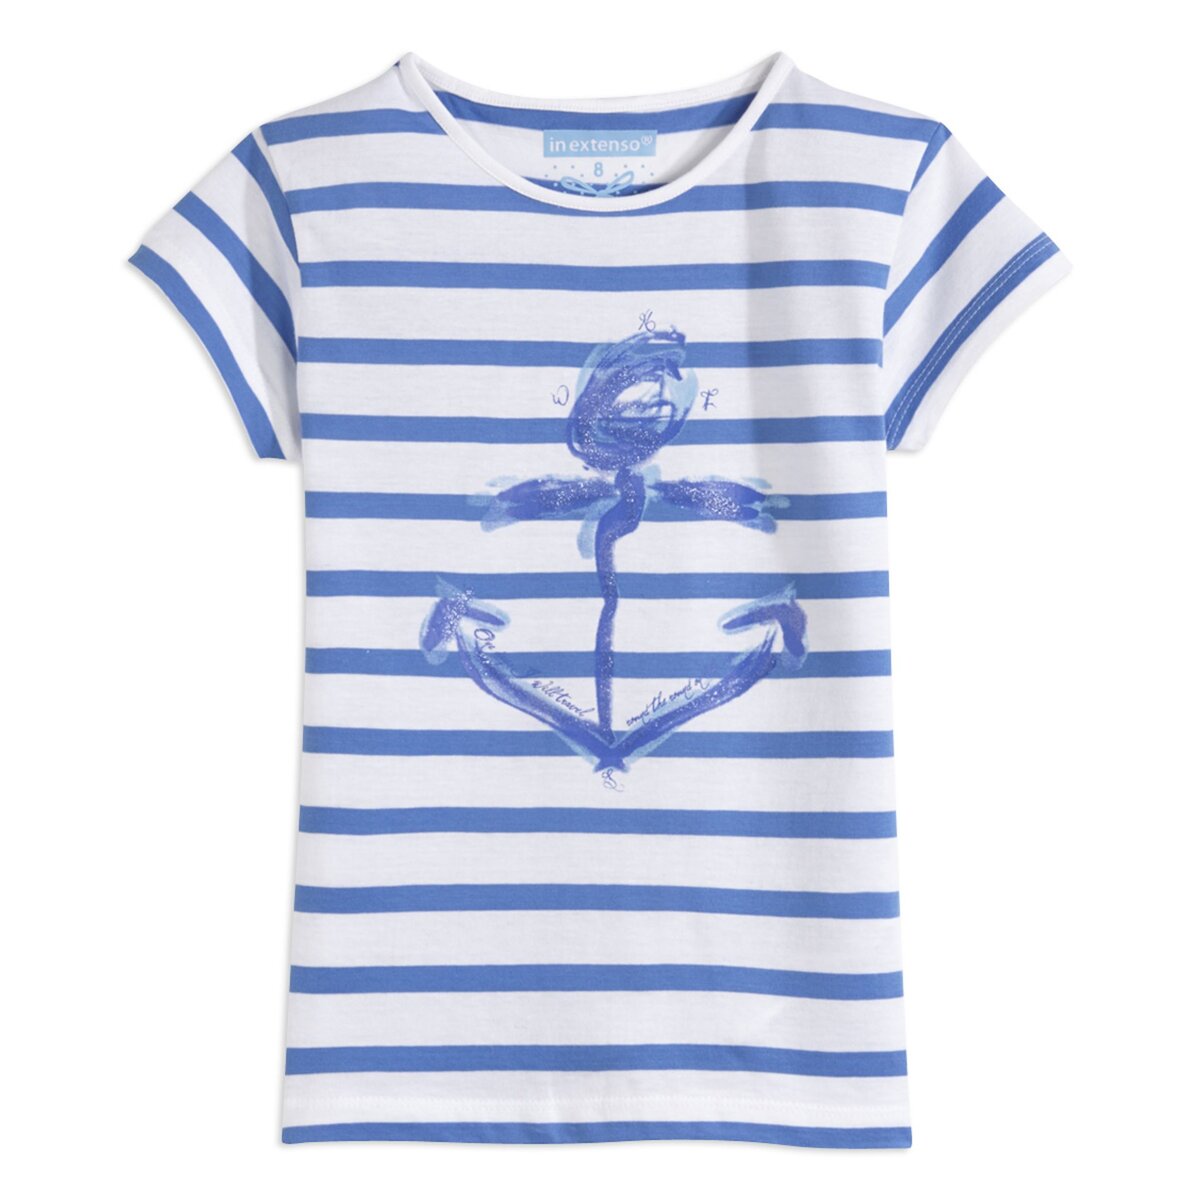 IN EXTENSO Tee-shirt rayé manches courtes fille